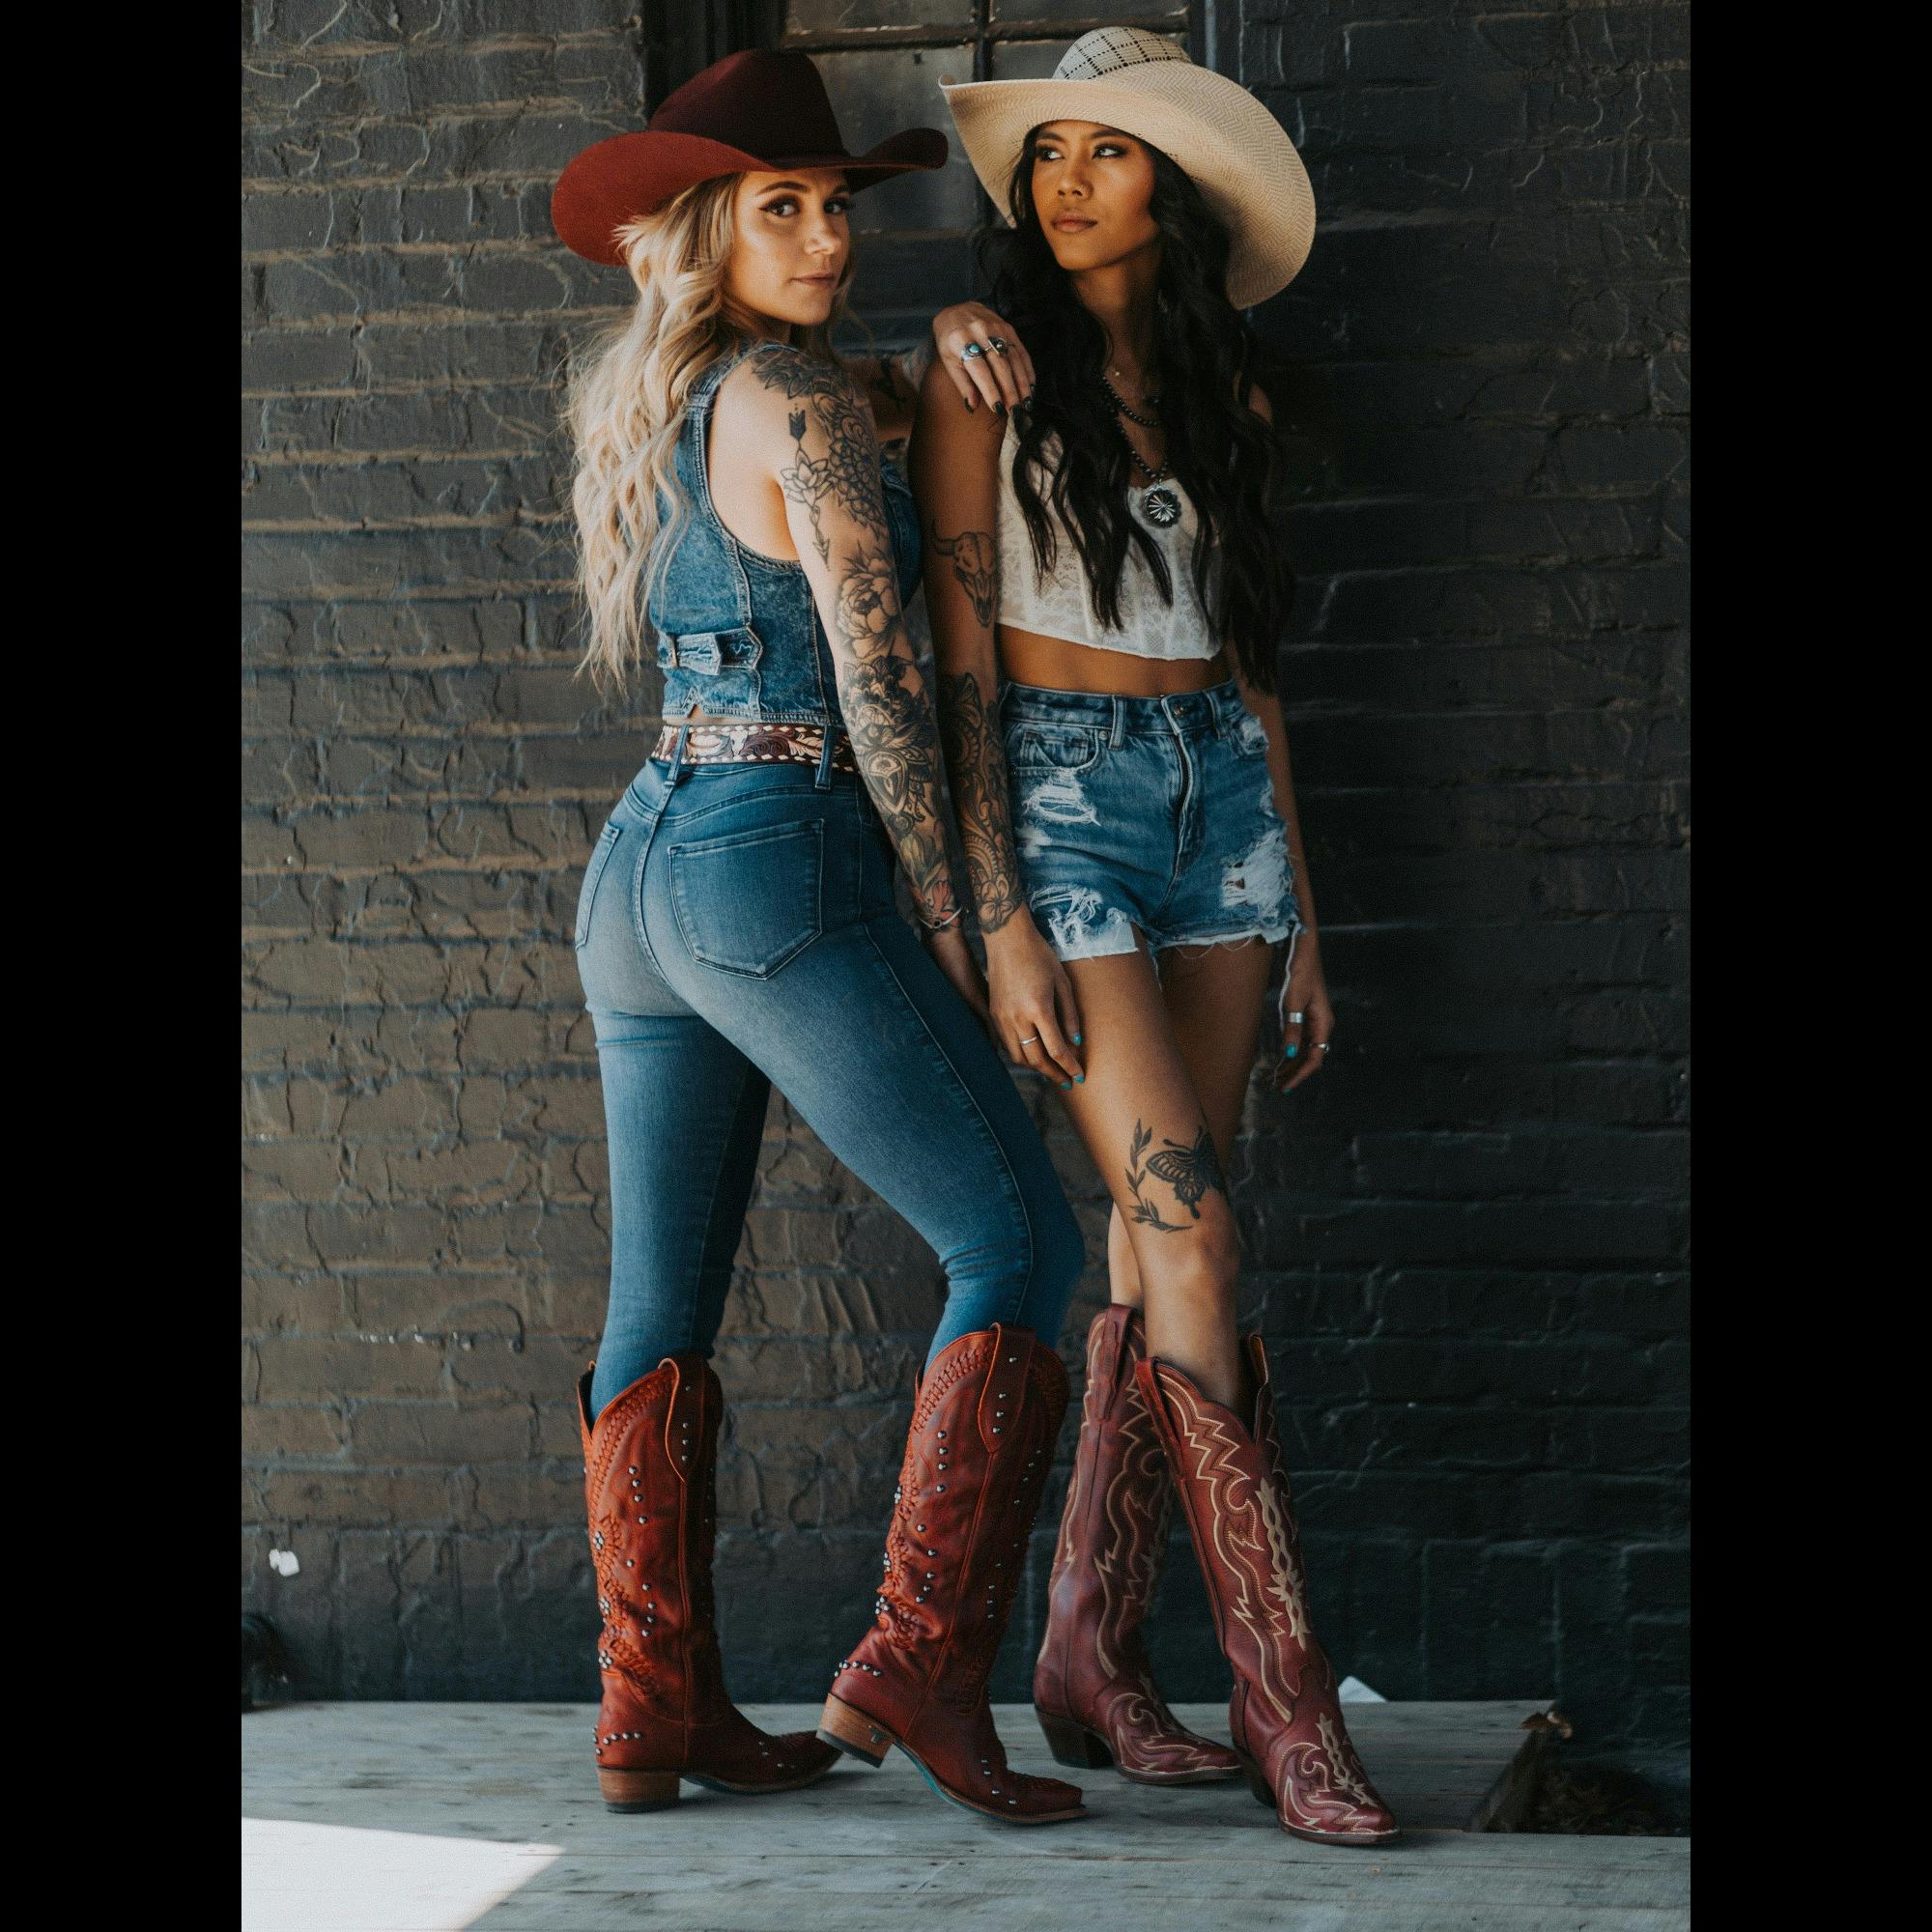 Glam Cowboy and Cowgirl Models